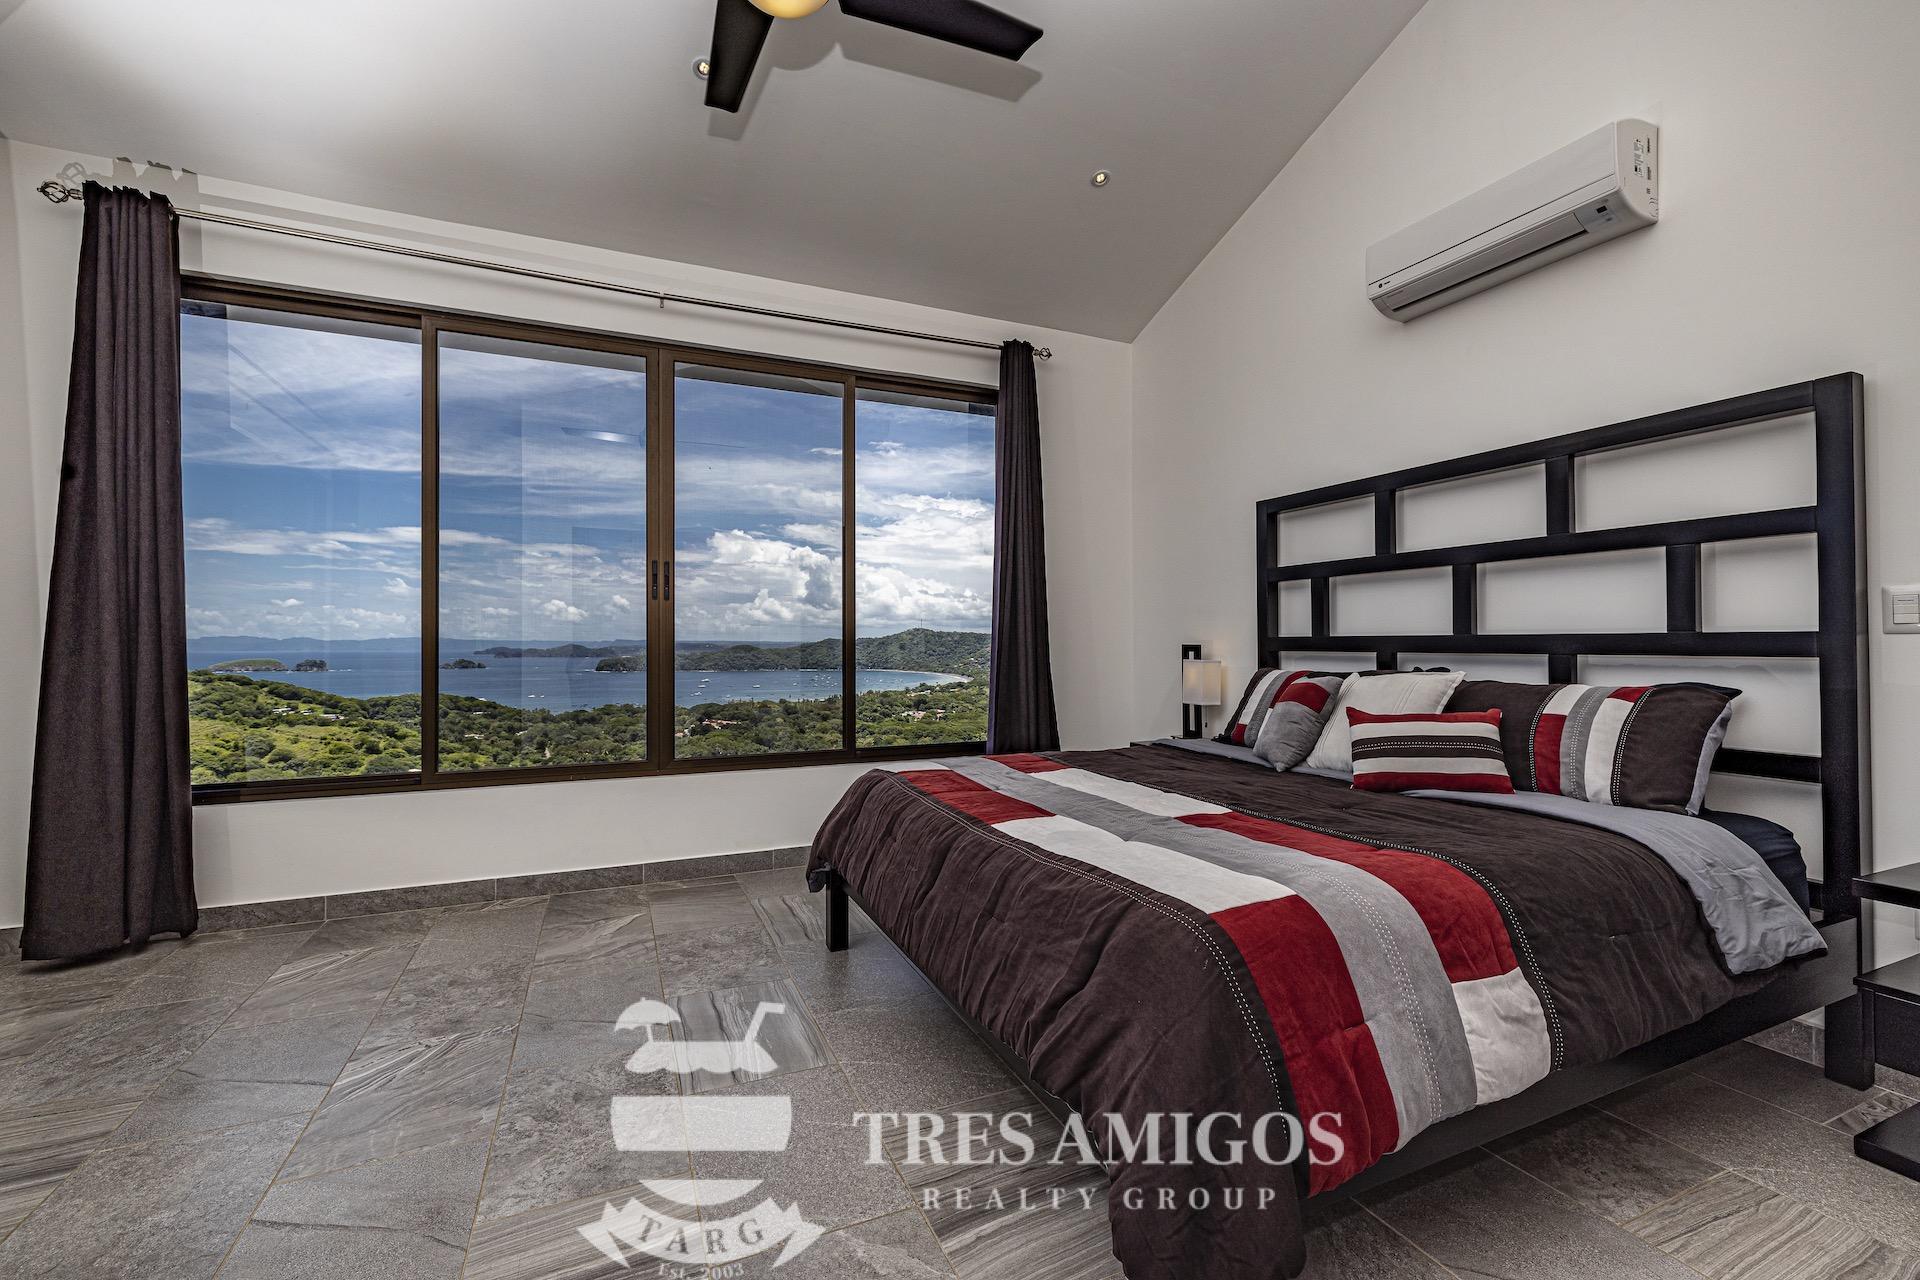 air conditioned bedroom with ceiling fan and glass window